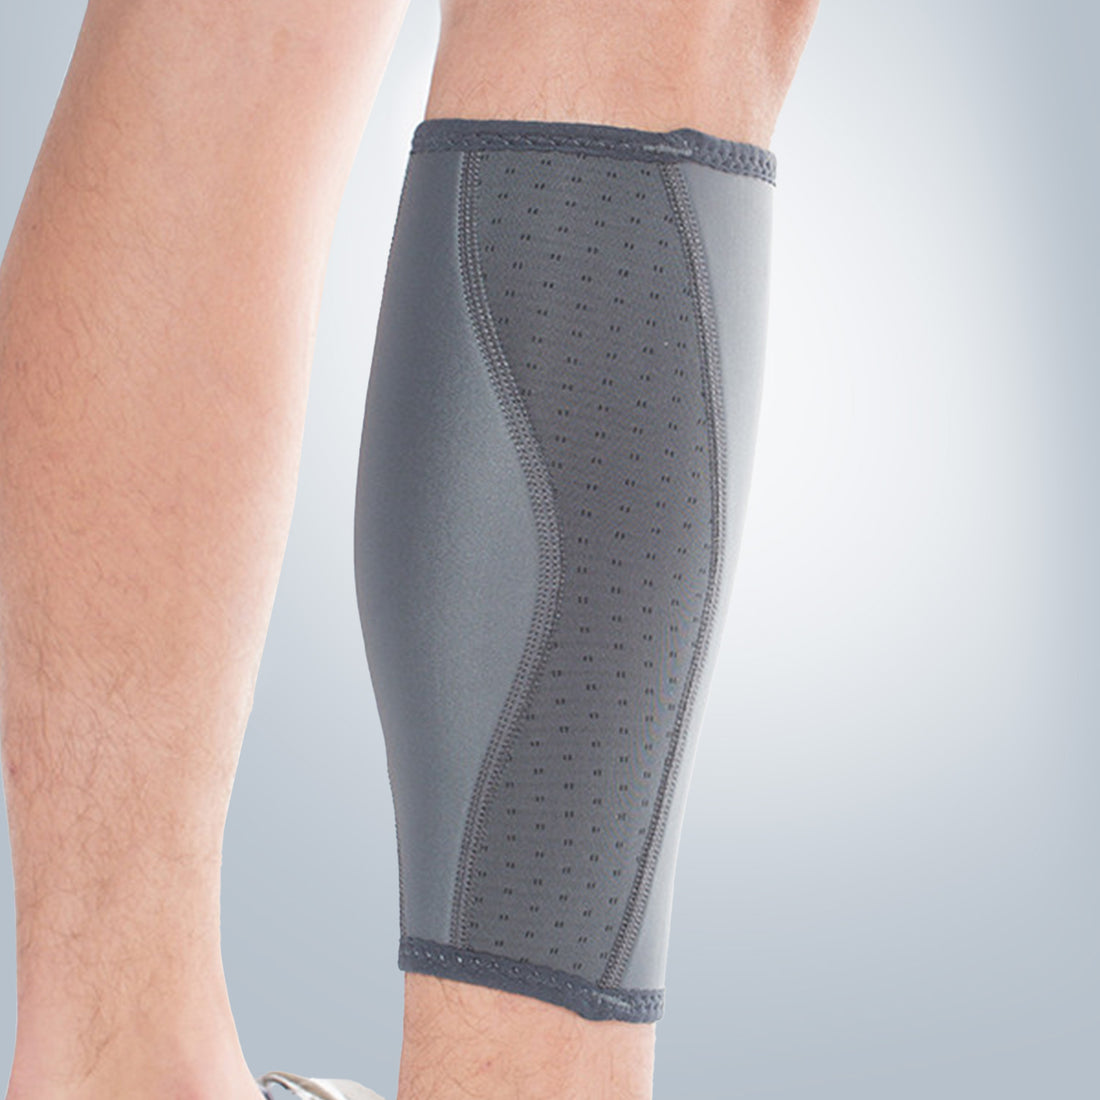 The Great Benefits of Compression Leg Sleeves for Athletes